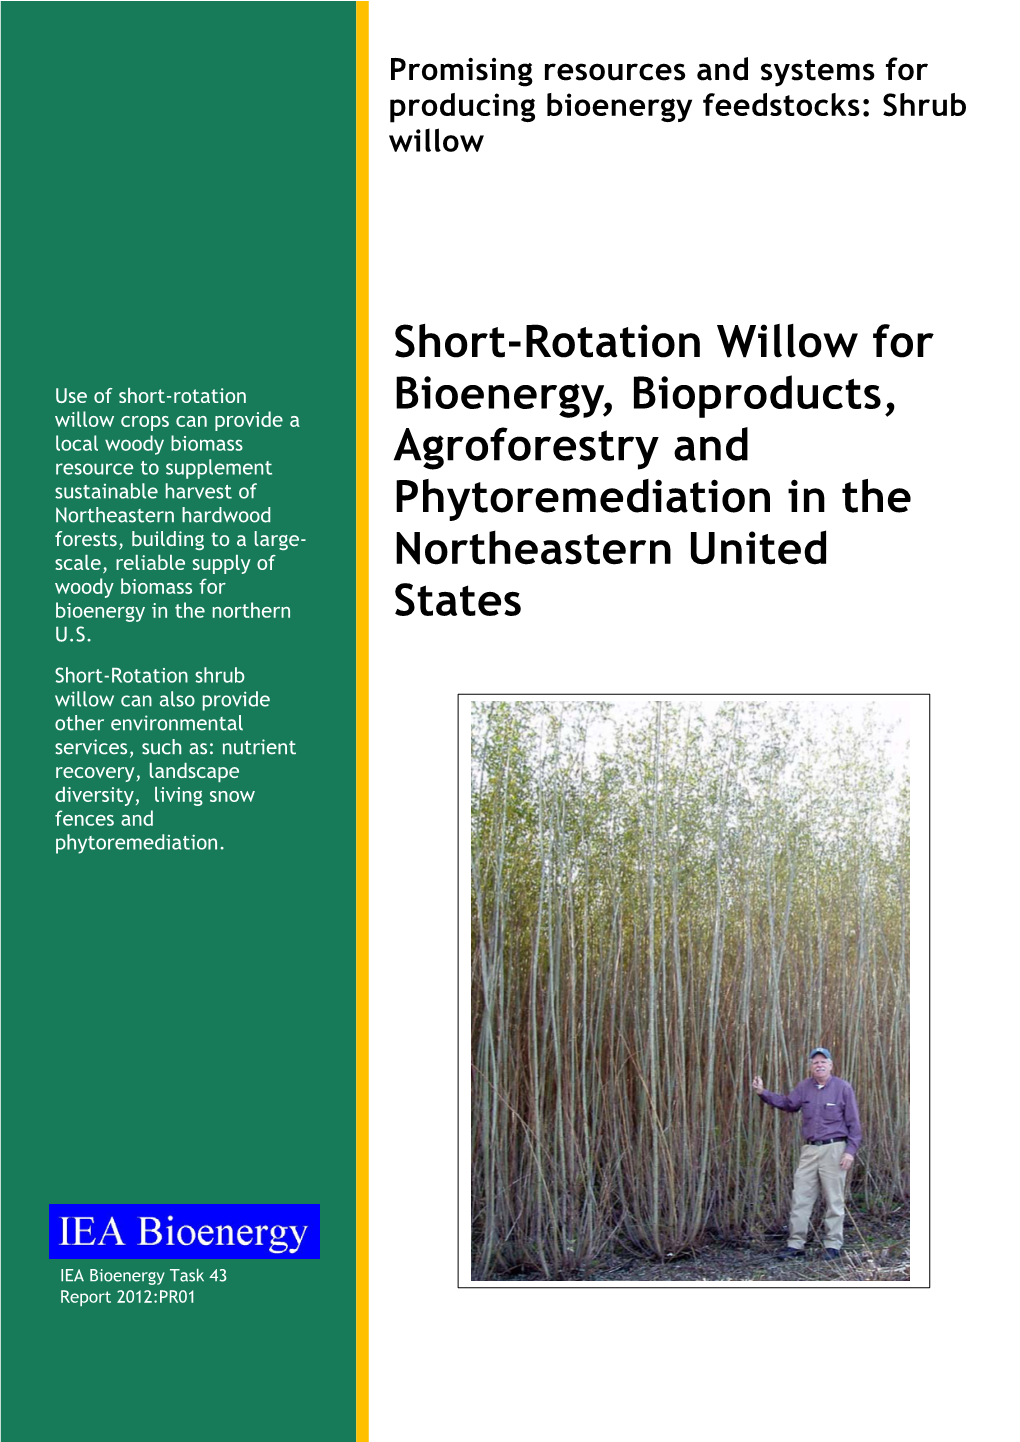 Short-Rotation Willow for Bioenergy, Bioproducts, Agroforestry and Phytoremediation in the Northeastern United States